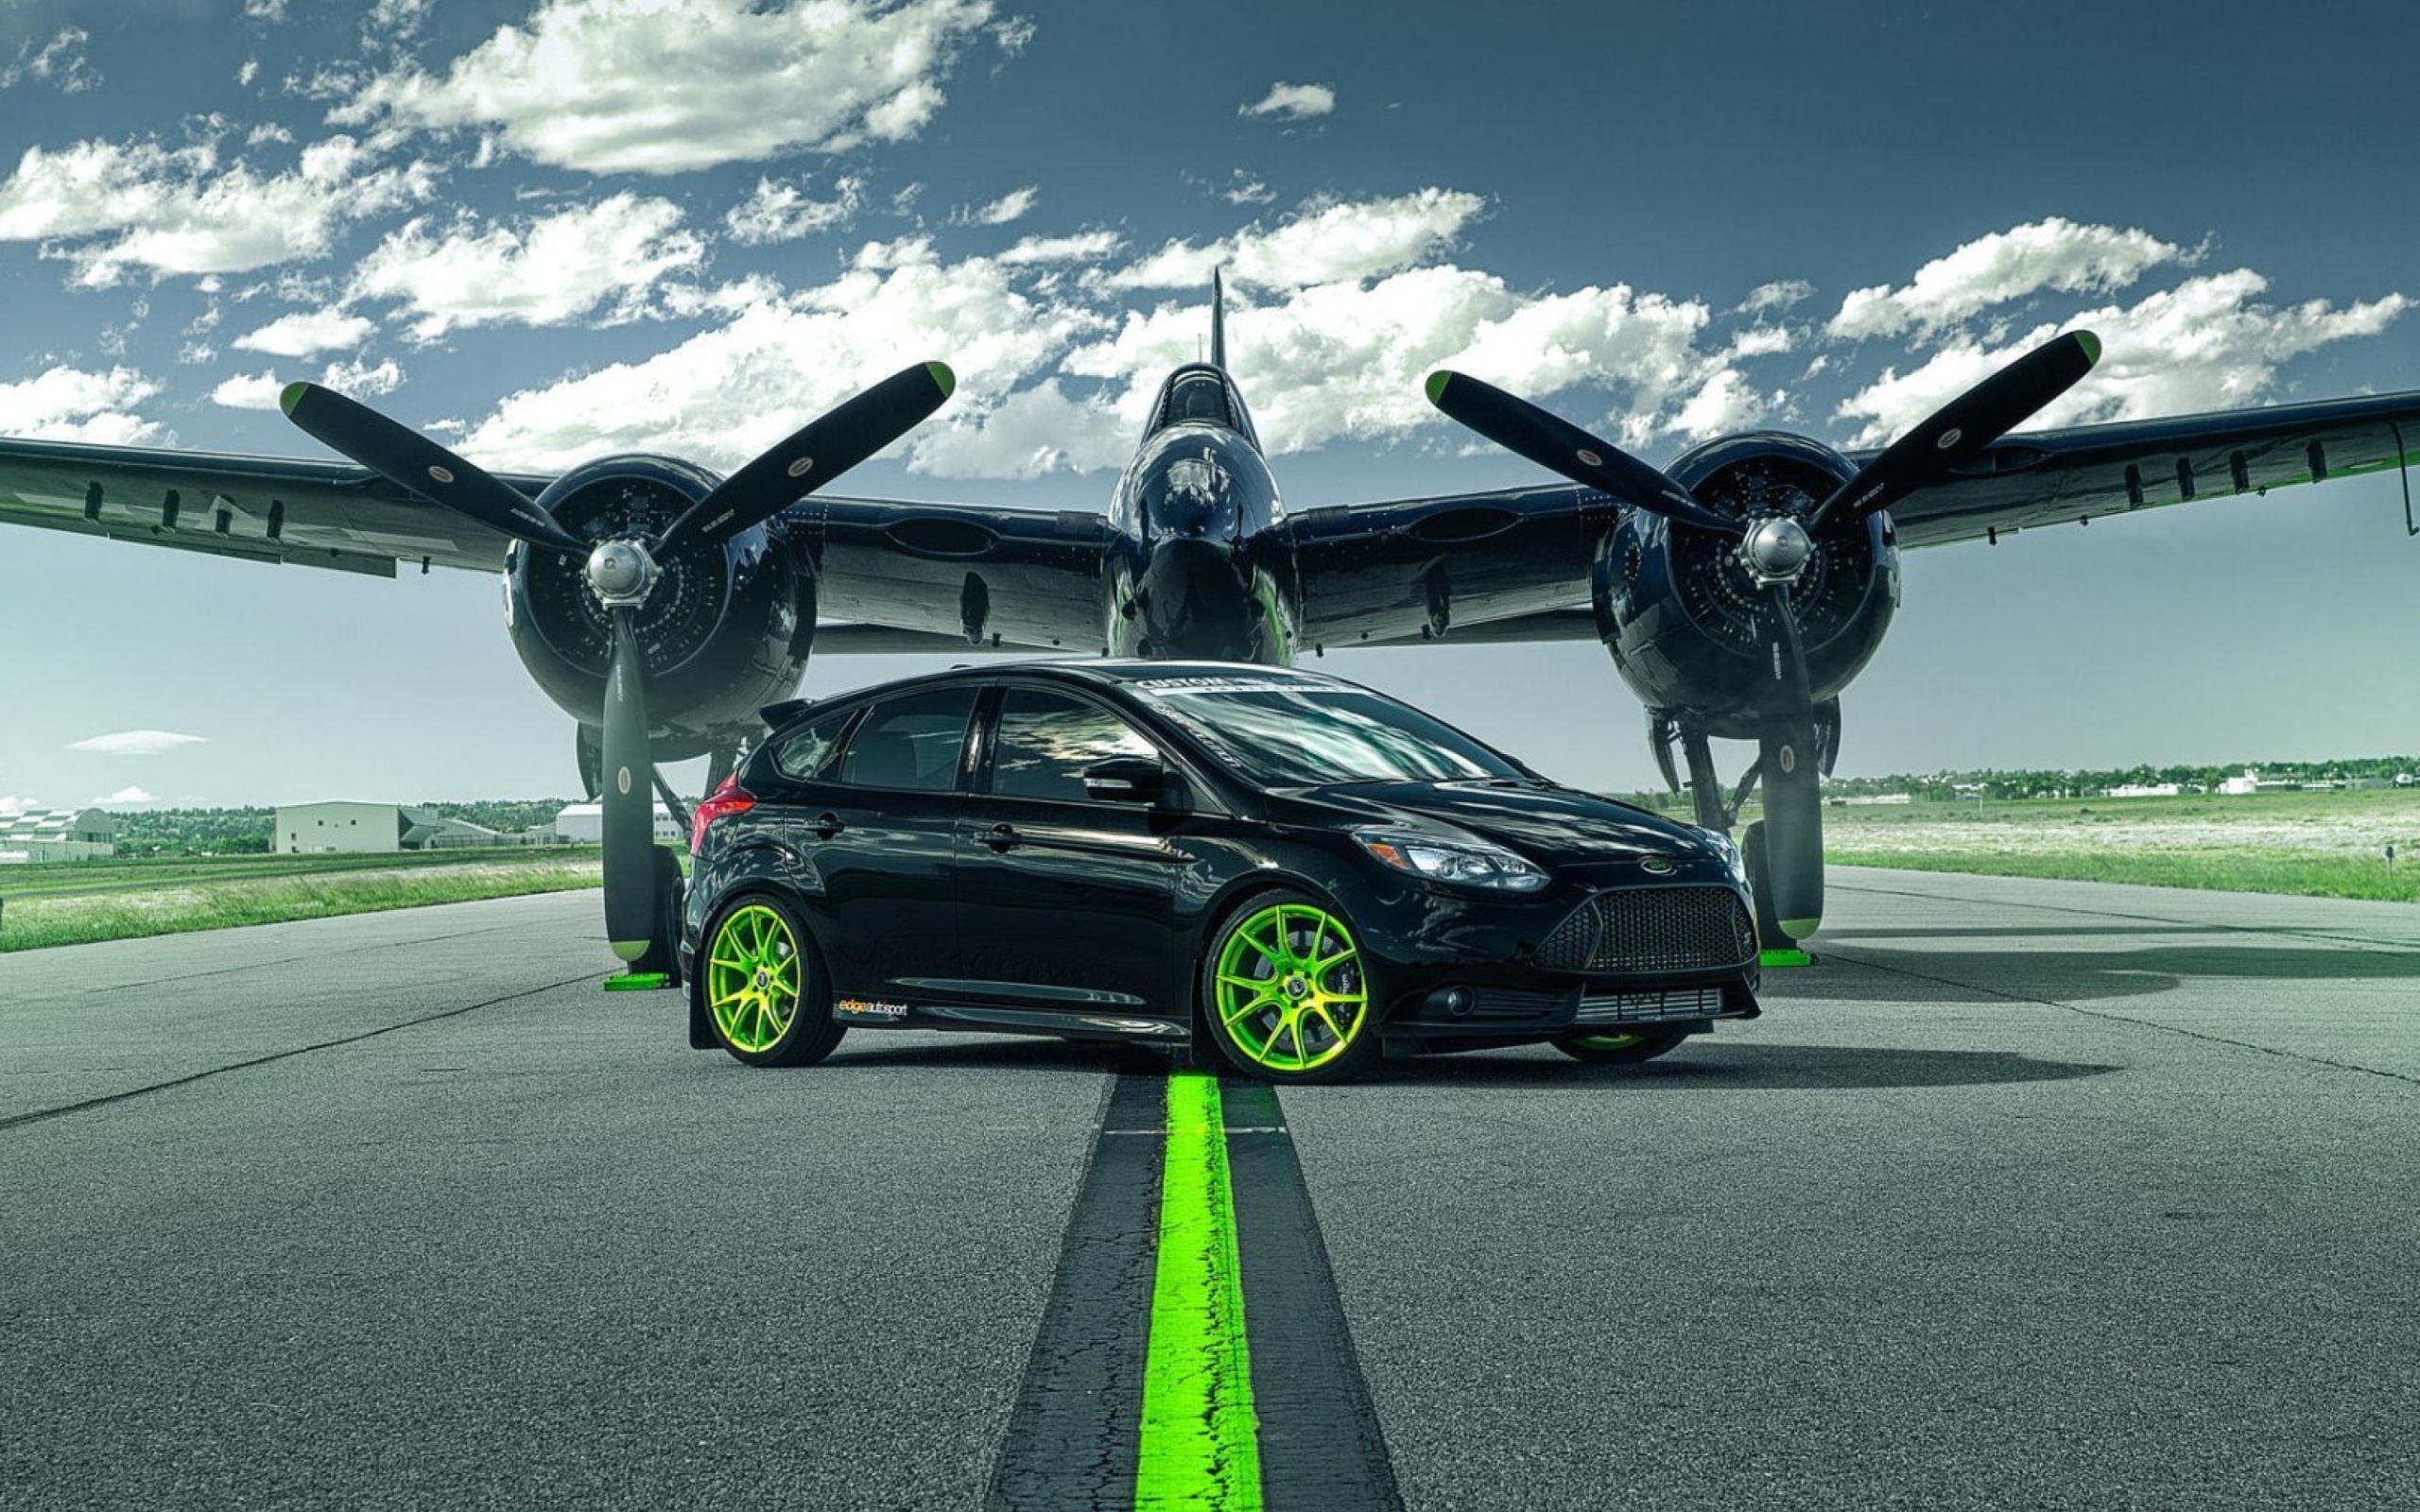 Das Ford Focus ST with Jet Wallpaper 2560x1600